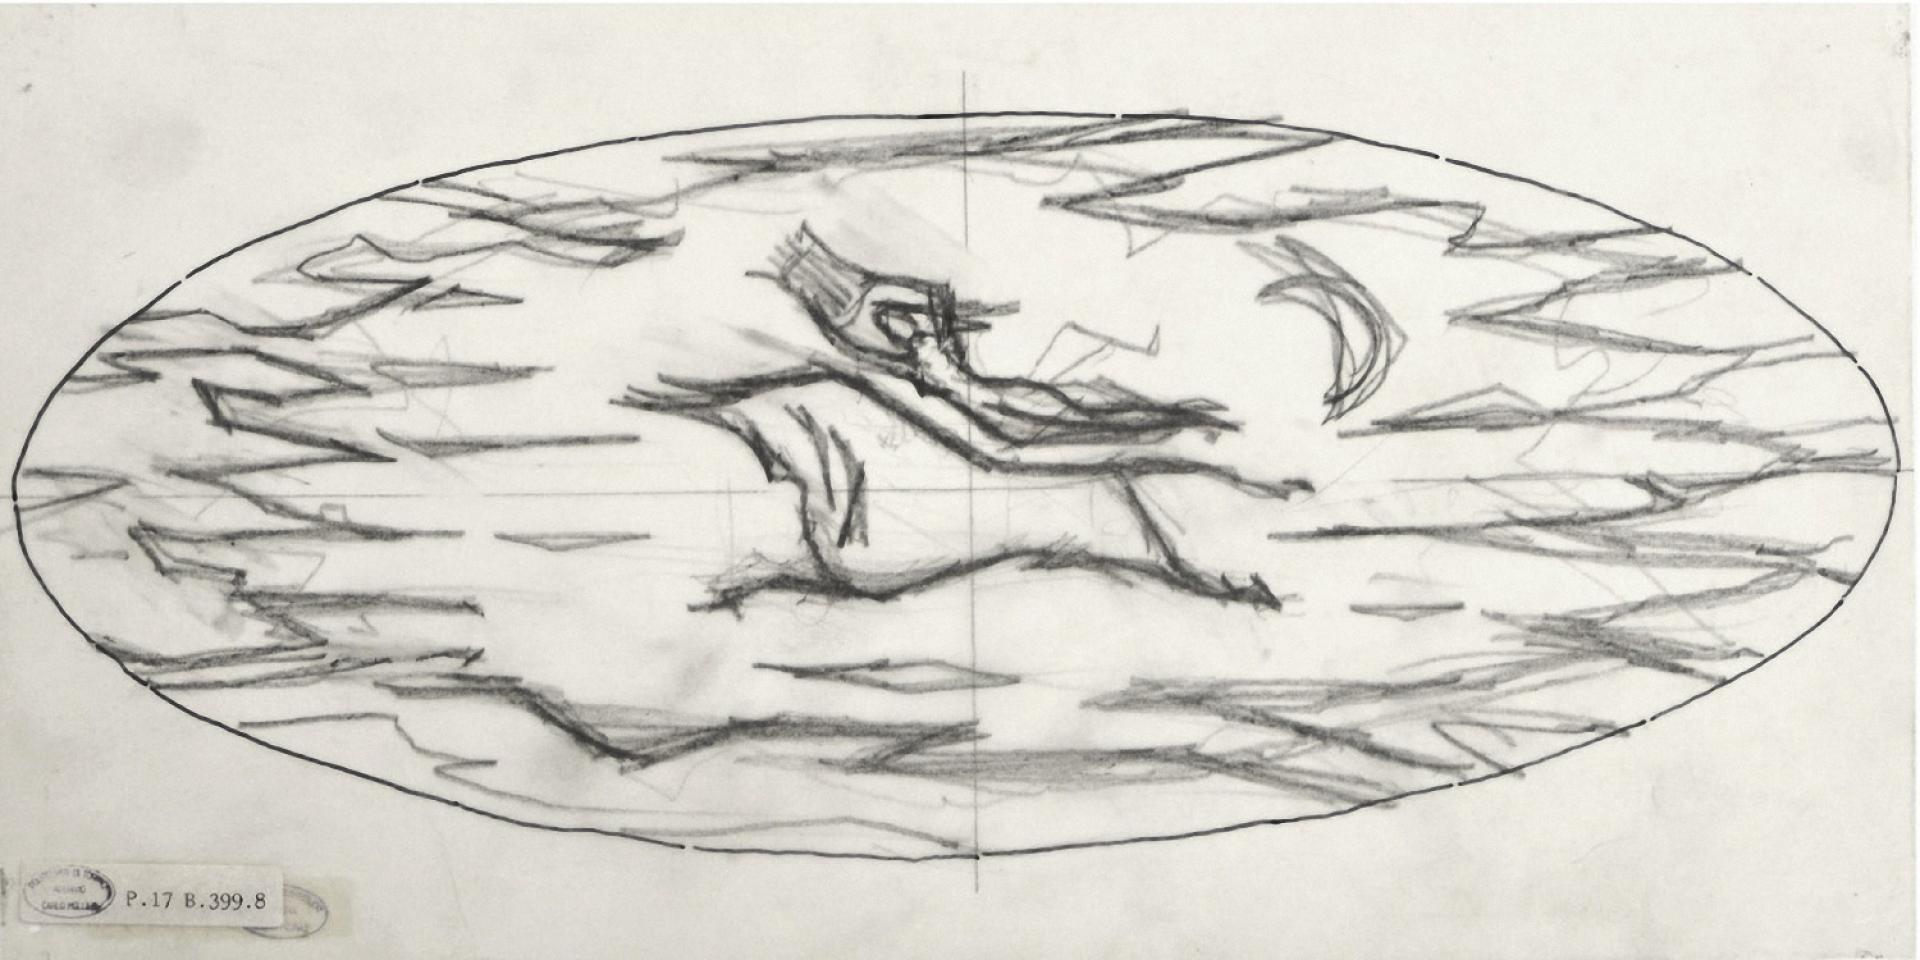 Sketch by Carlo Mollino for the marble mosaic in the Foyer del Toro